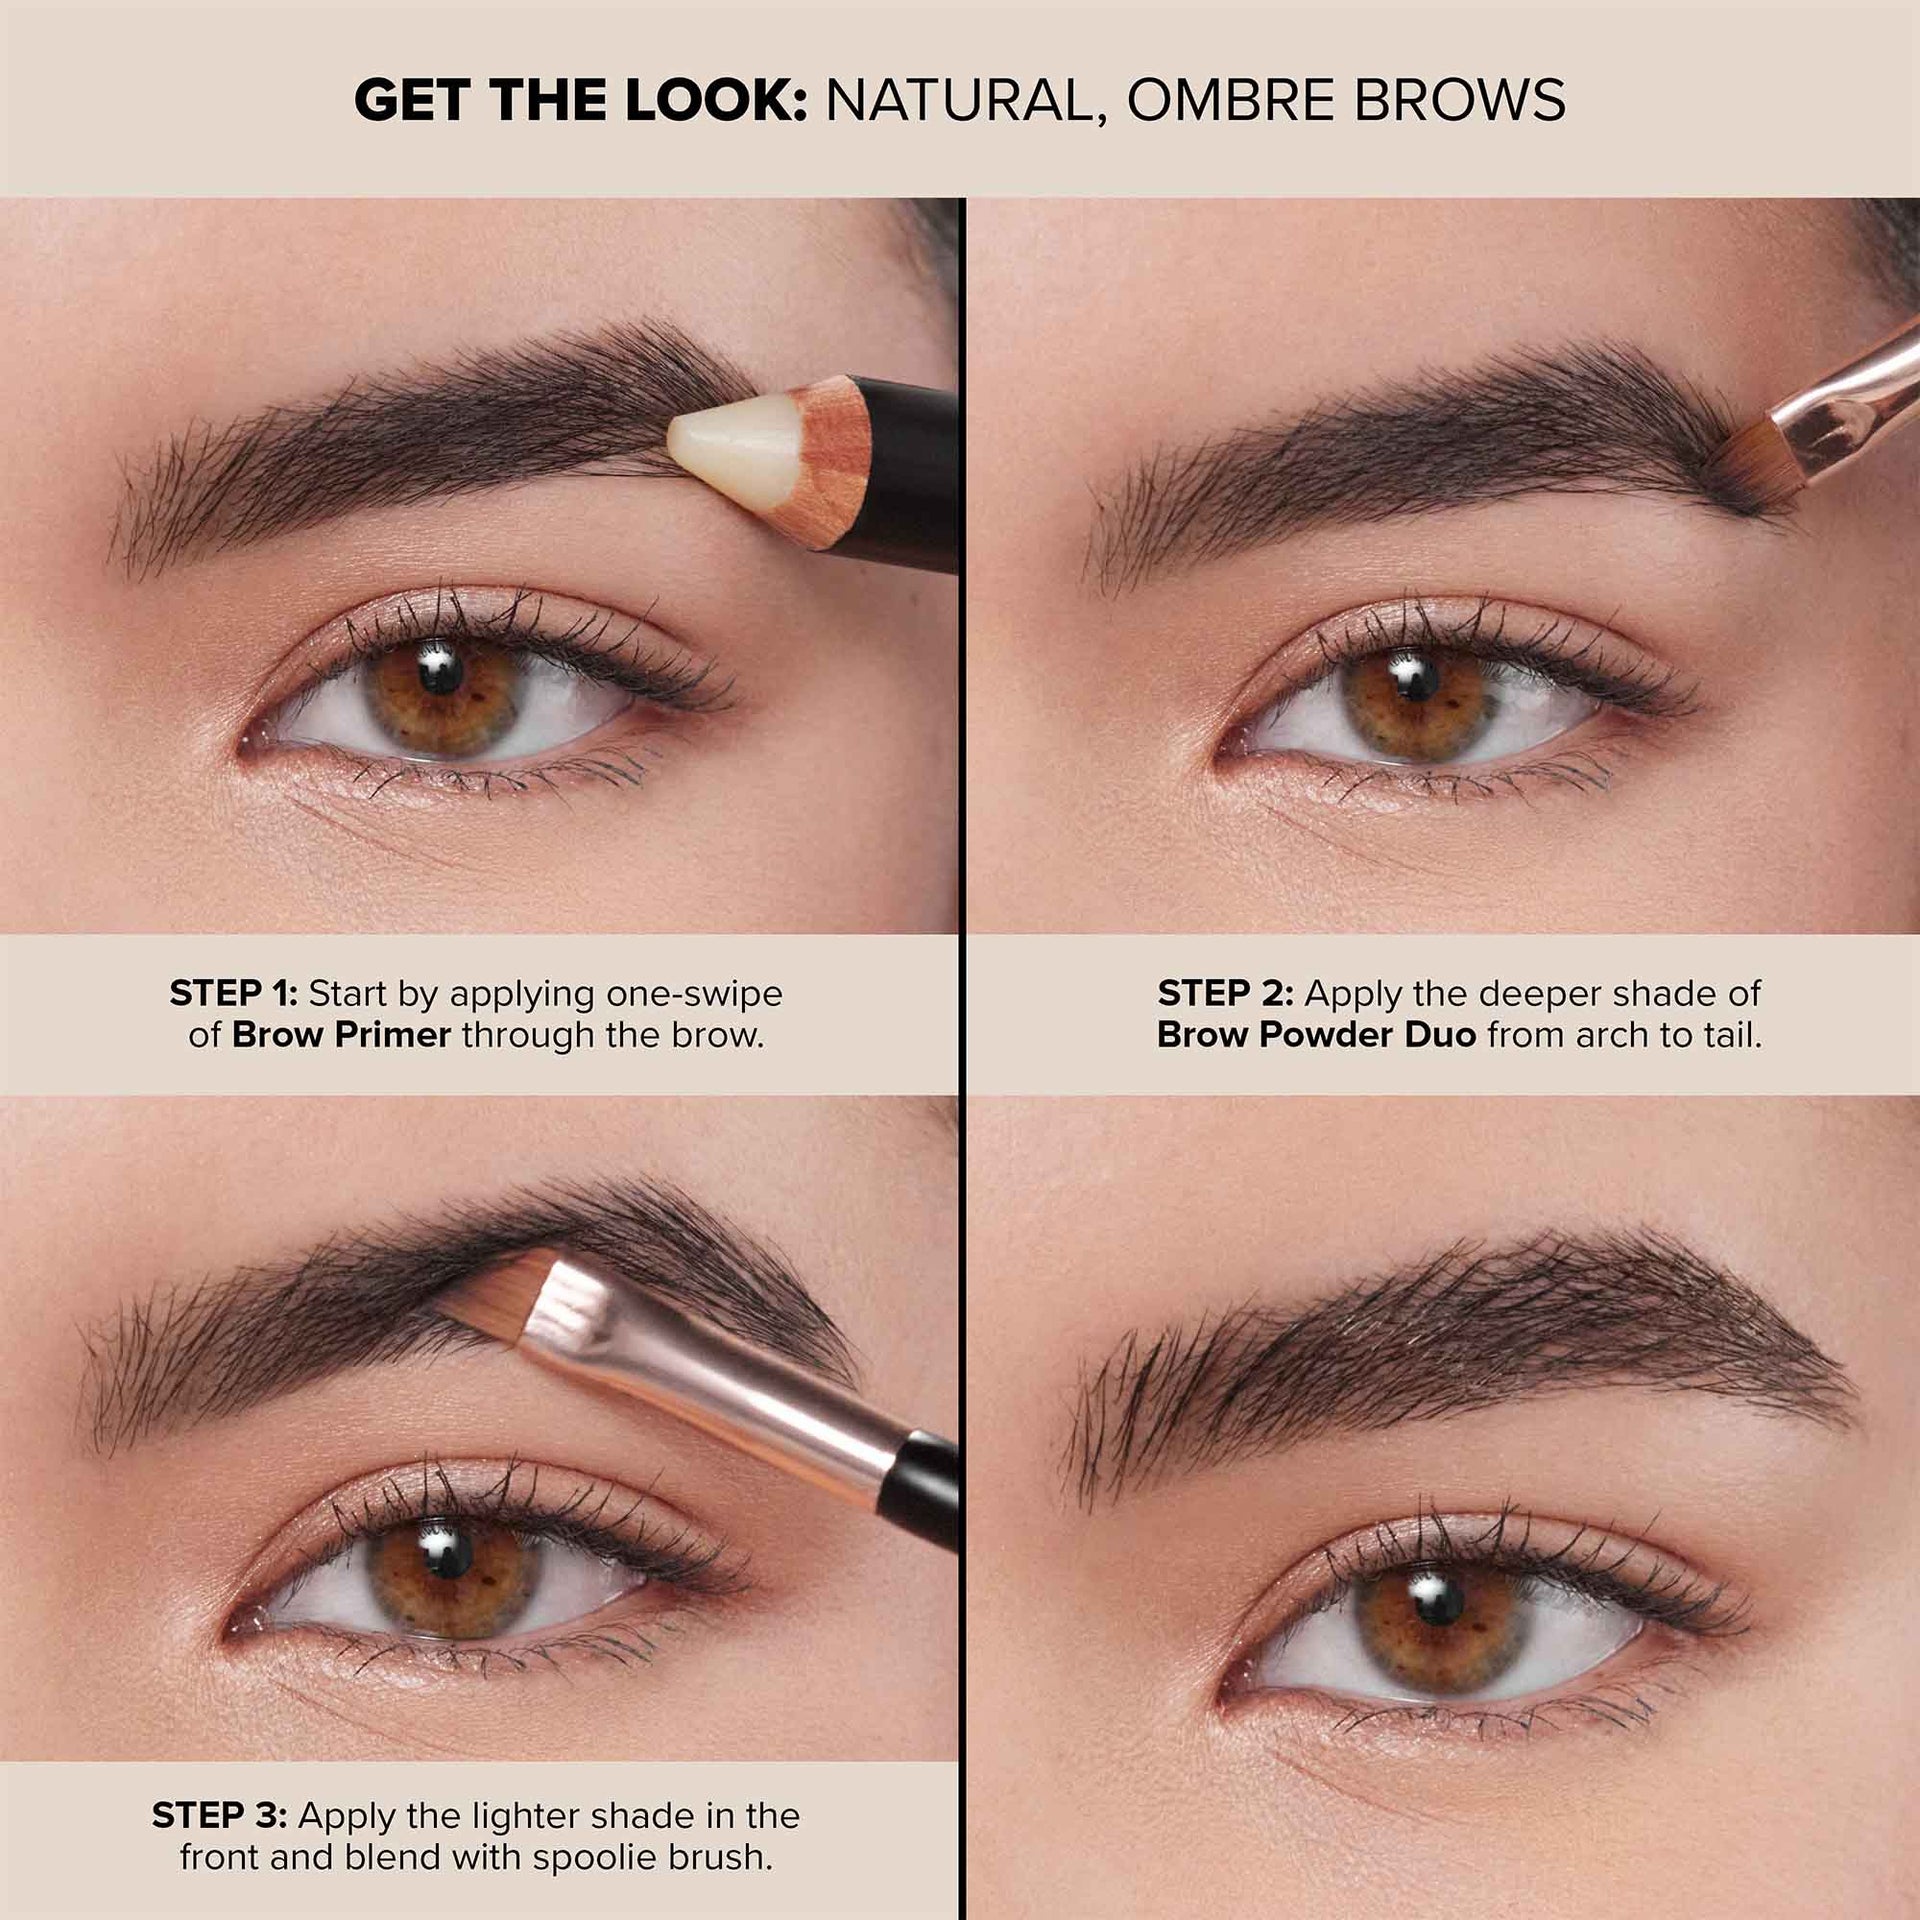 Get The Look: Natural Ombre Brows